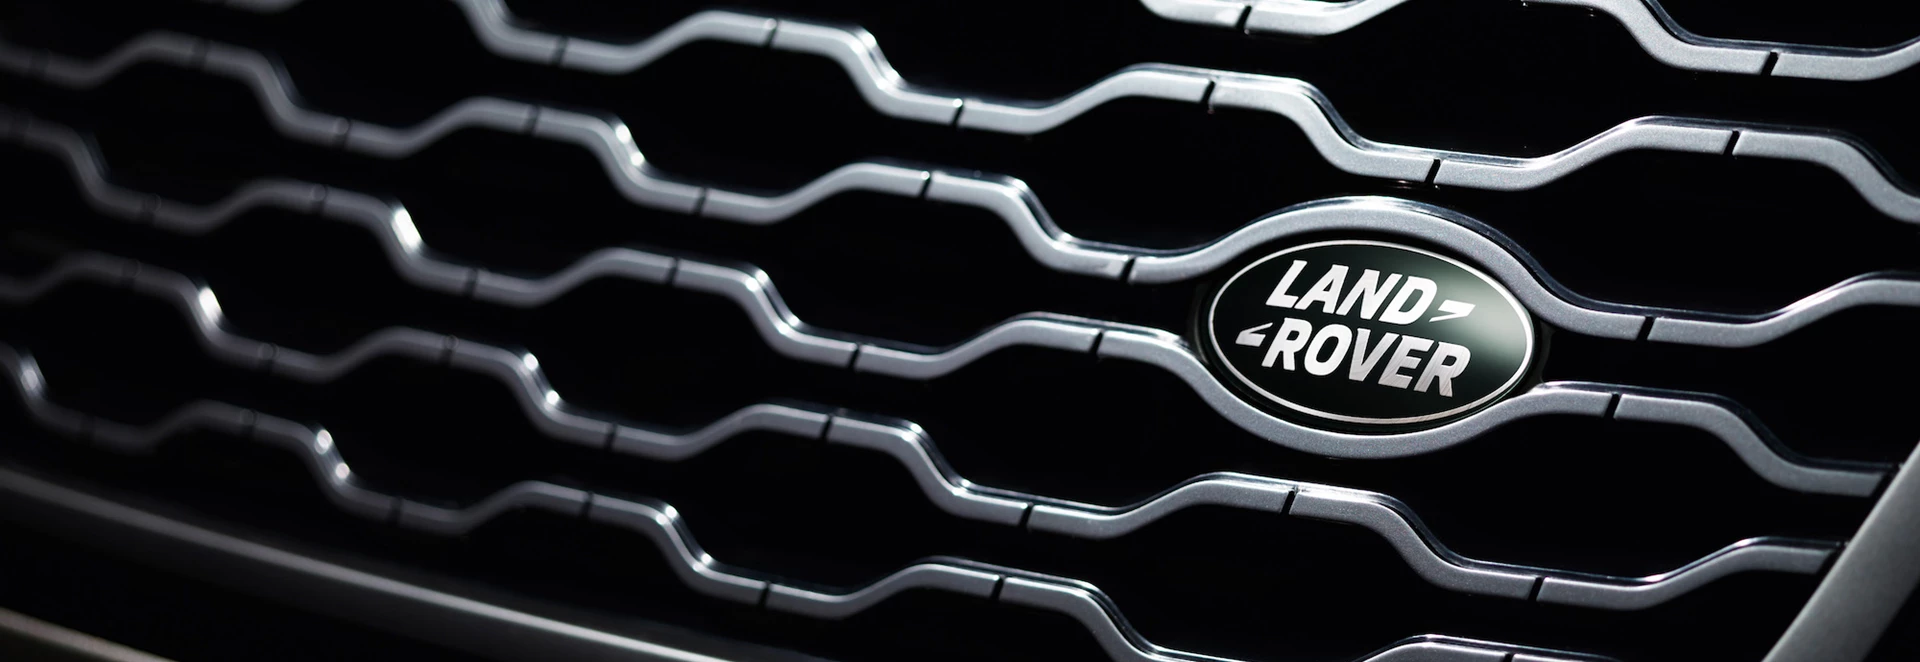 Land Rover teases Range Rover SV Coupe